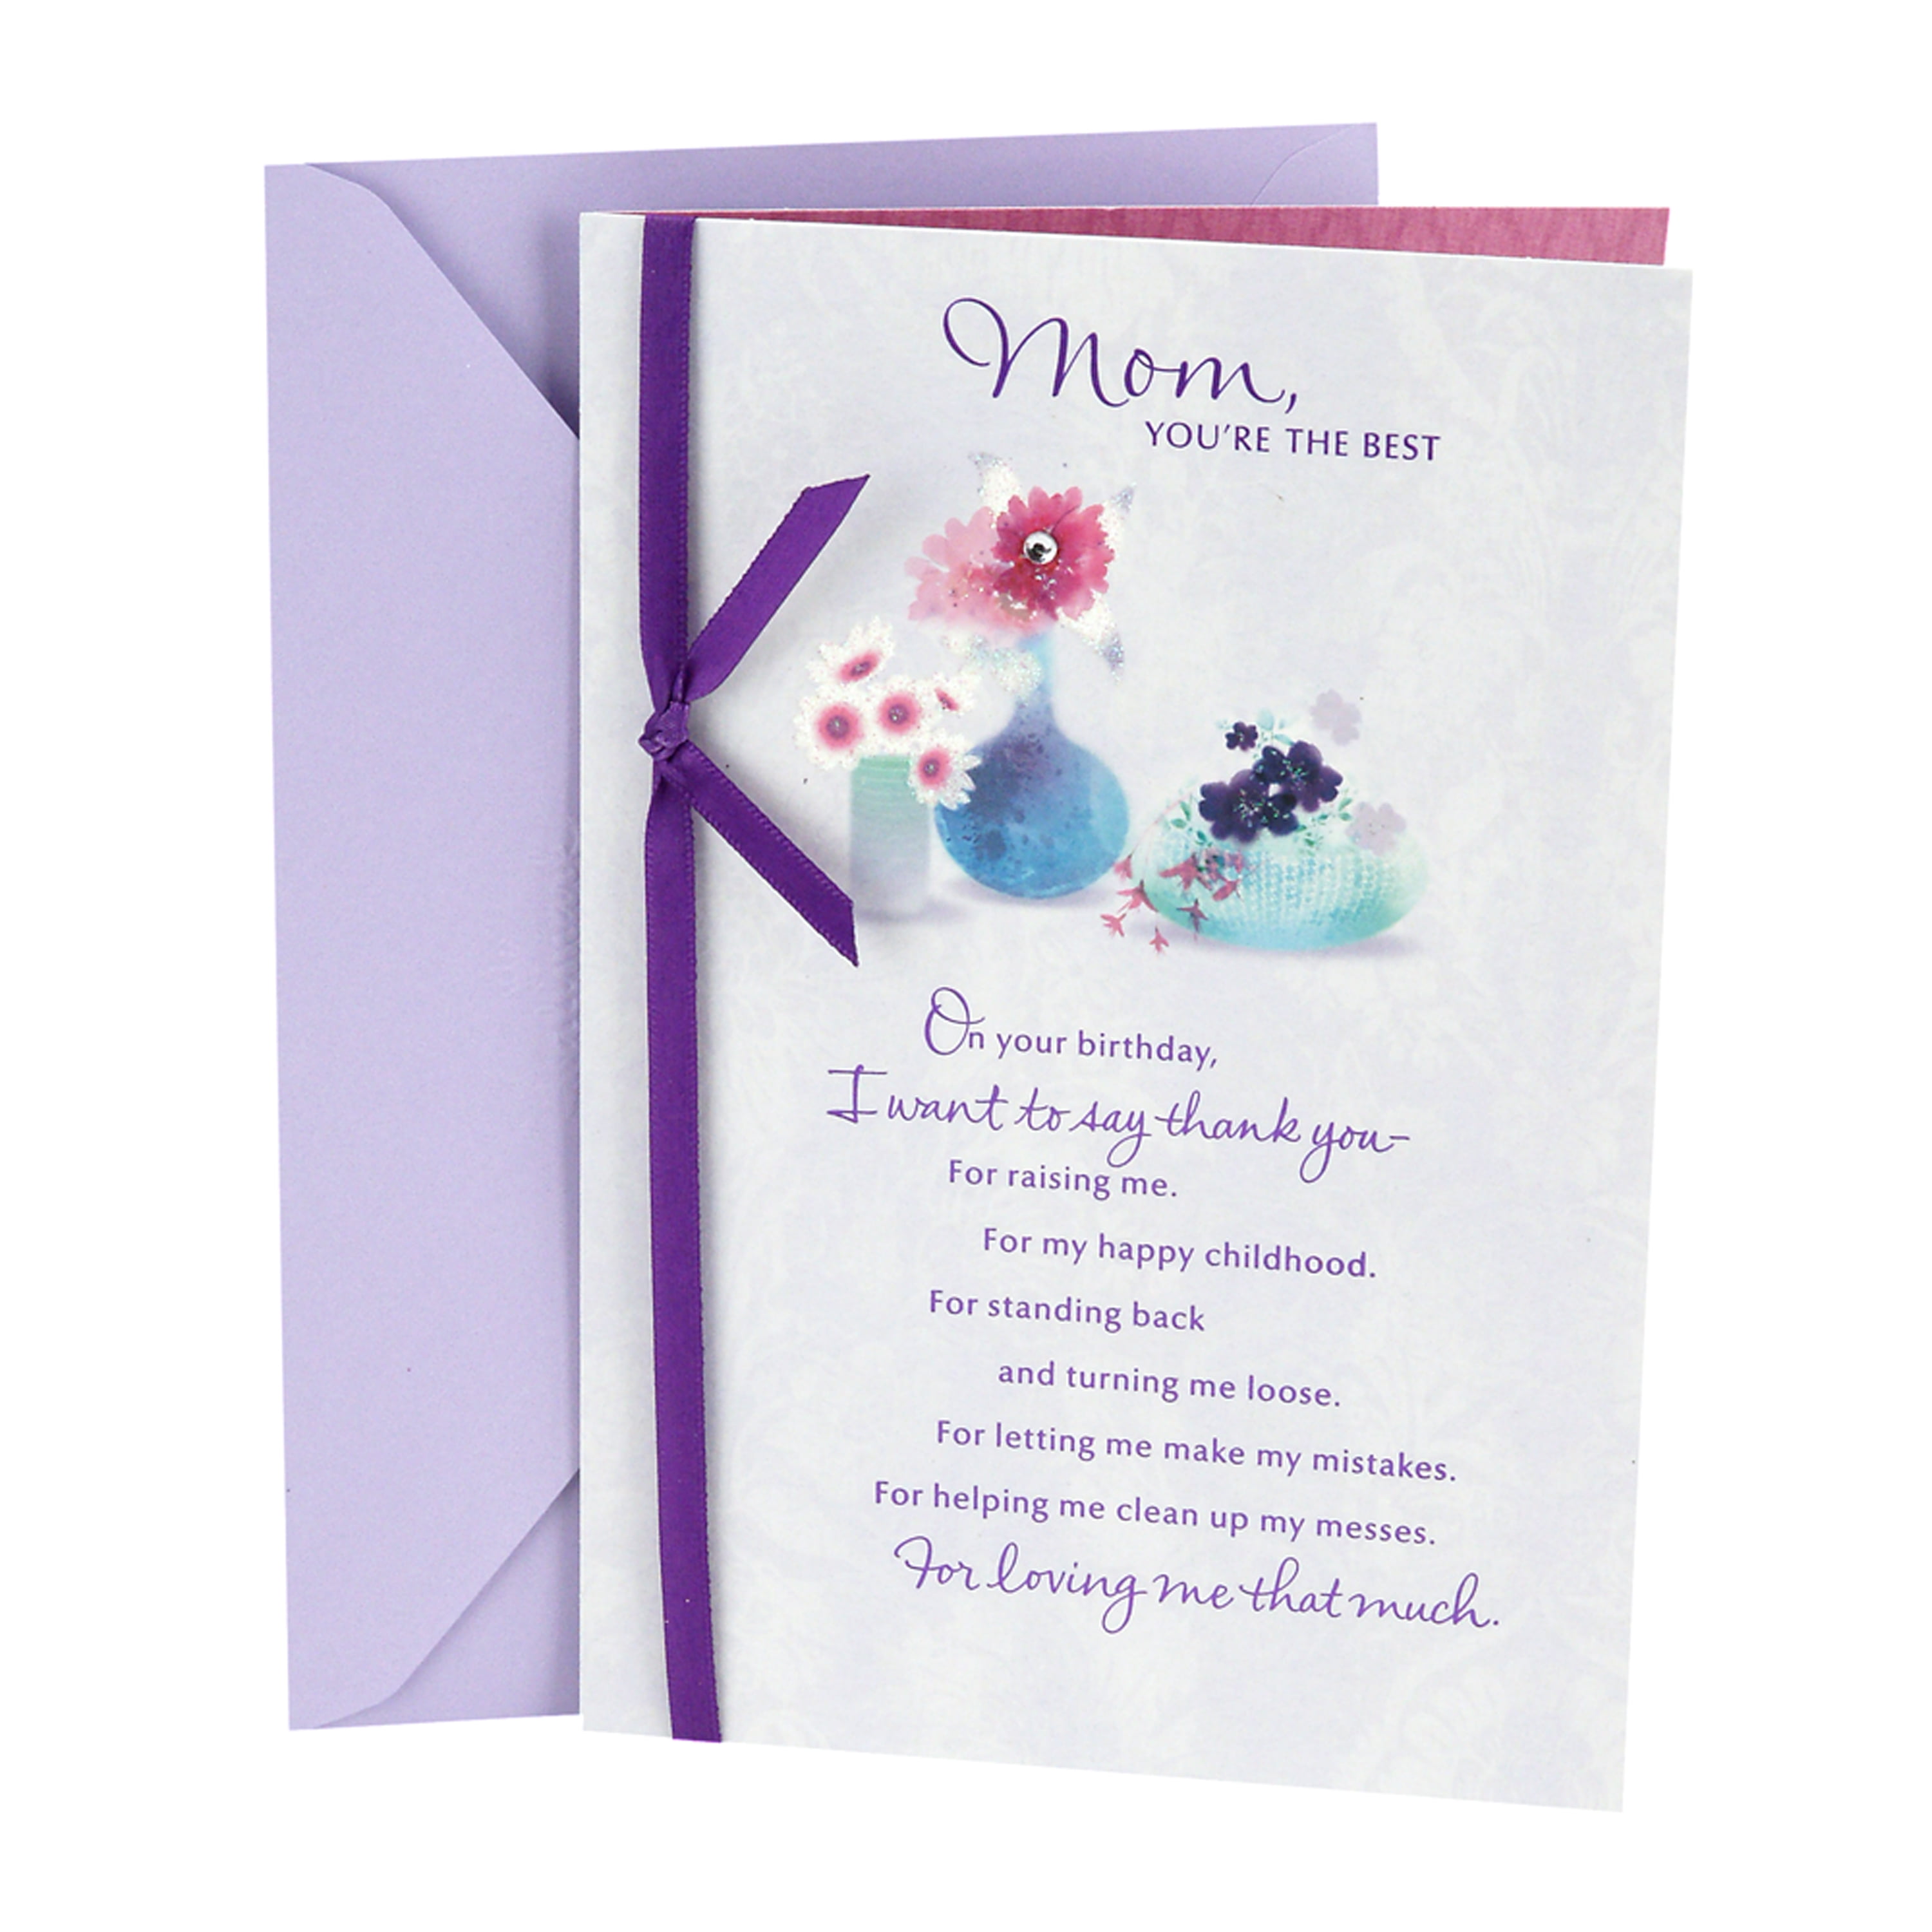 Hallmark Birthday Greeting Card to Mother (Flowers with Vases) - Walmart.com